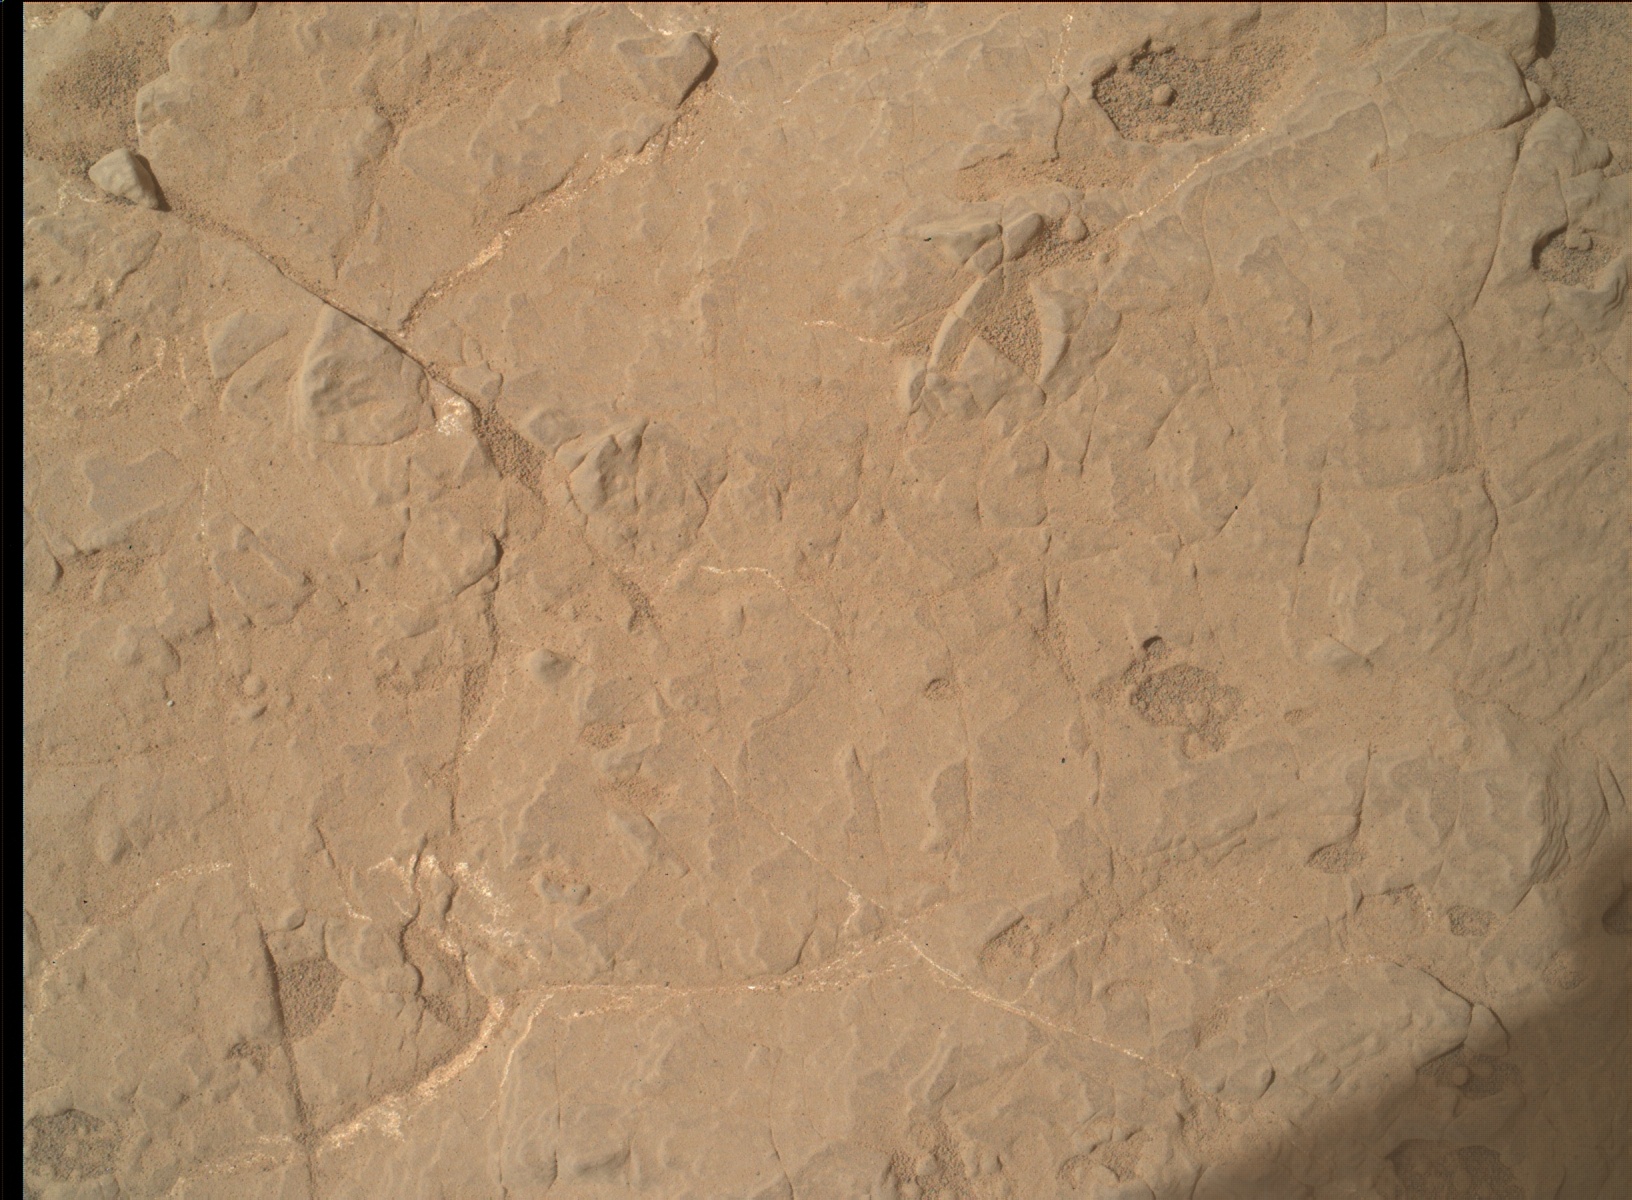 Nasa's Mars rover Curiosity acquired this image using its Mars Hand Lens Imager (MAHLI) on Sol 3049